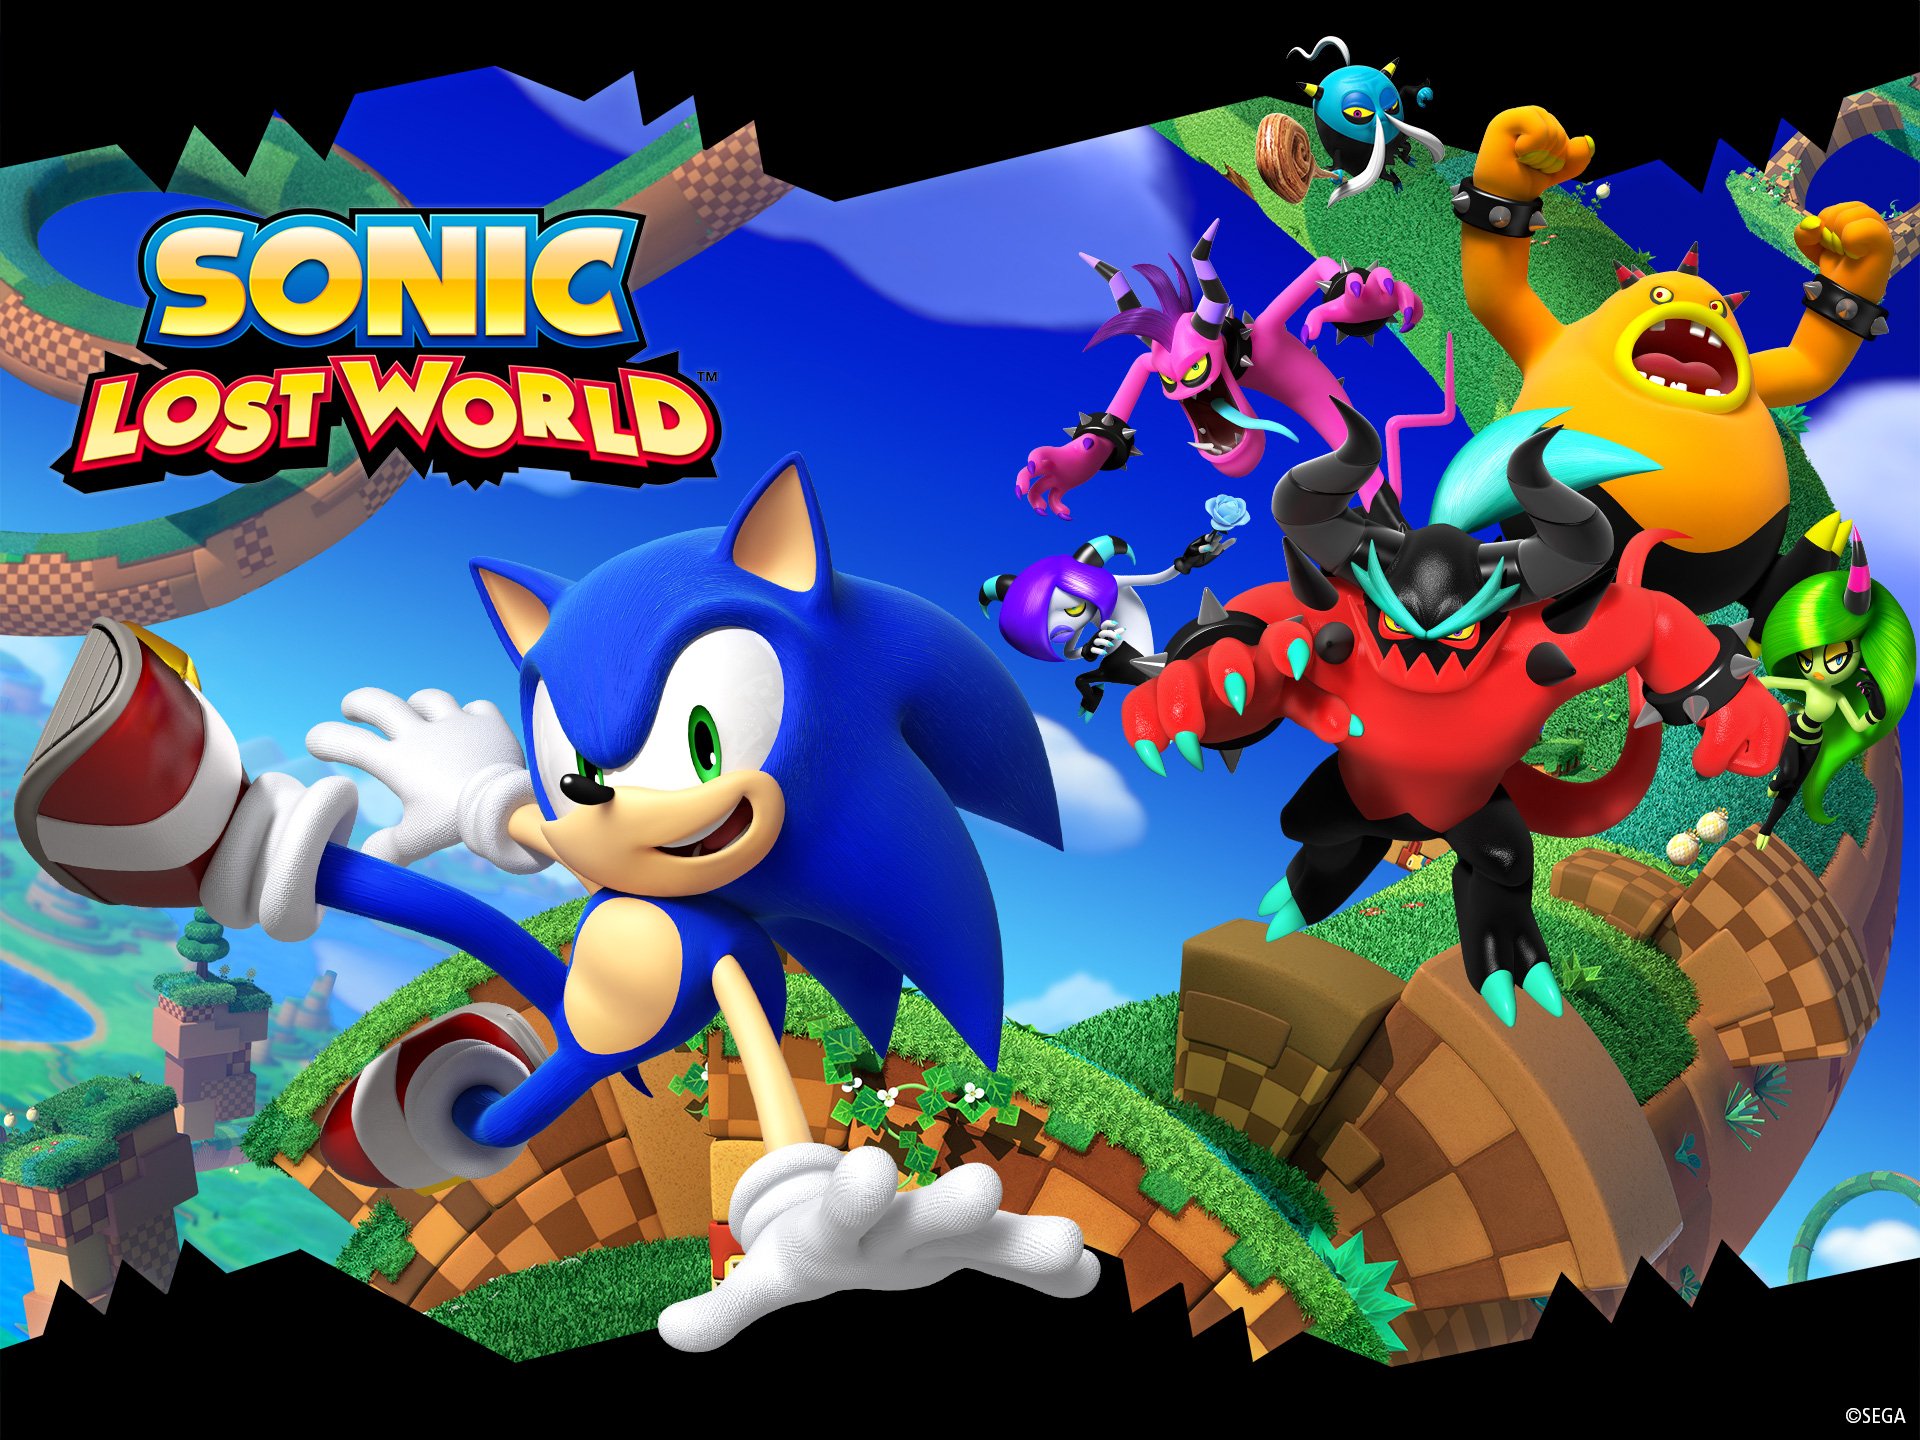  Sonic  Lost  World  HD Wallpaper Background Image 